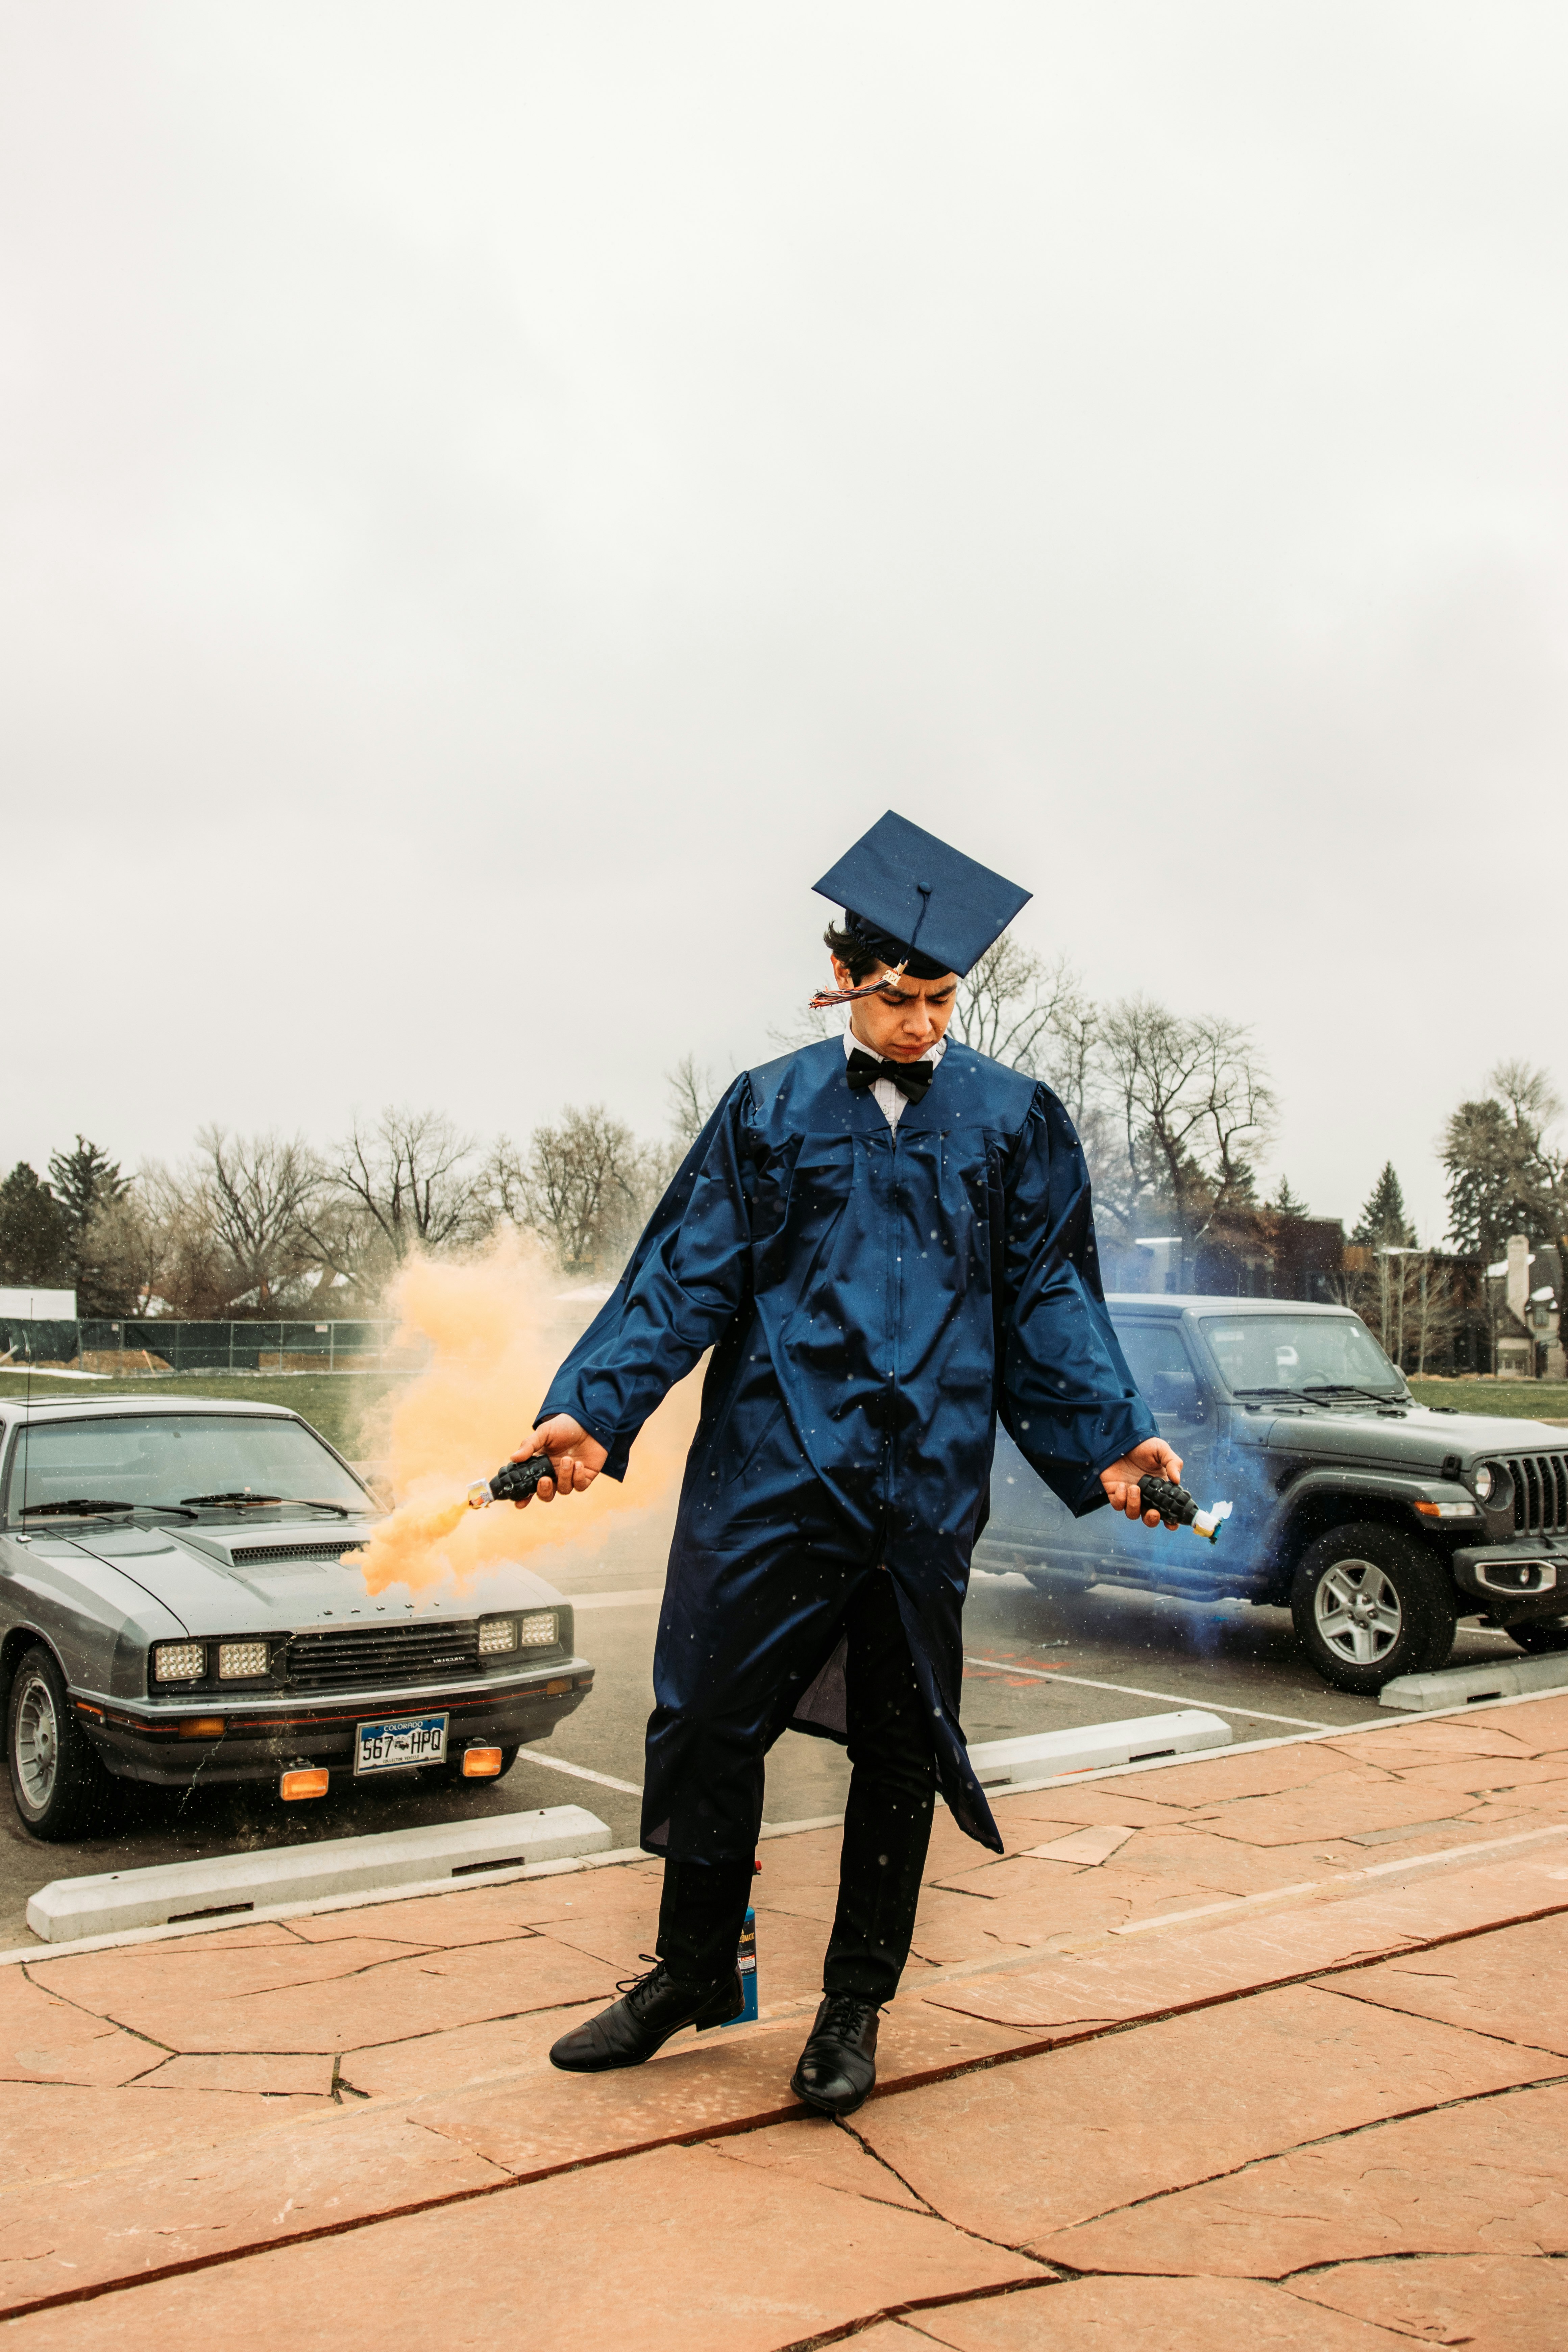 man in blue academic dress and black mortar board standing on road during daytime